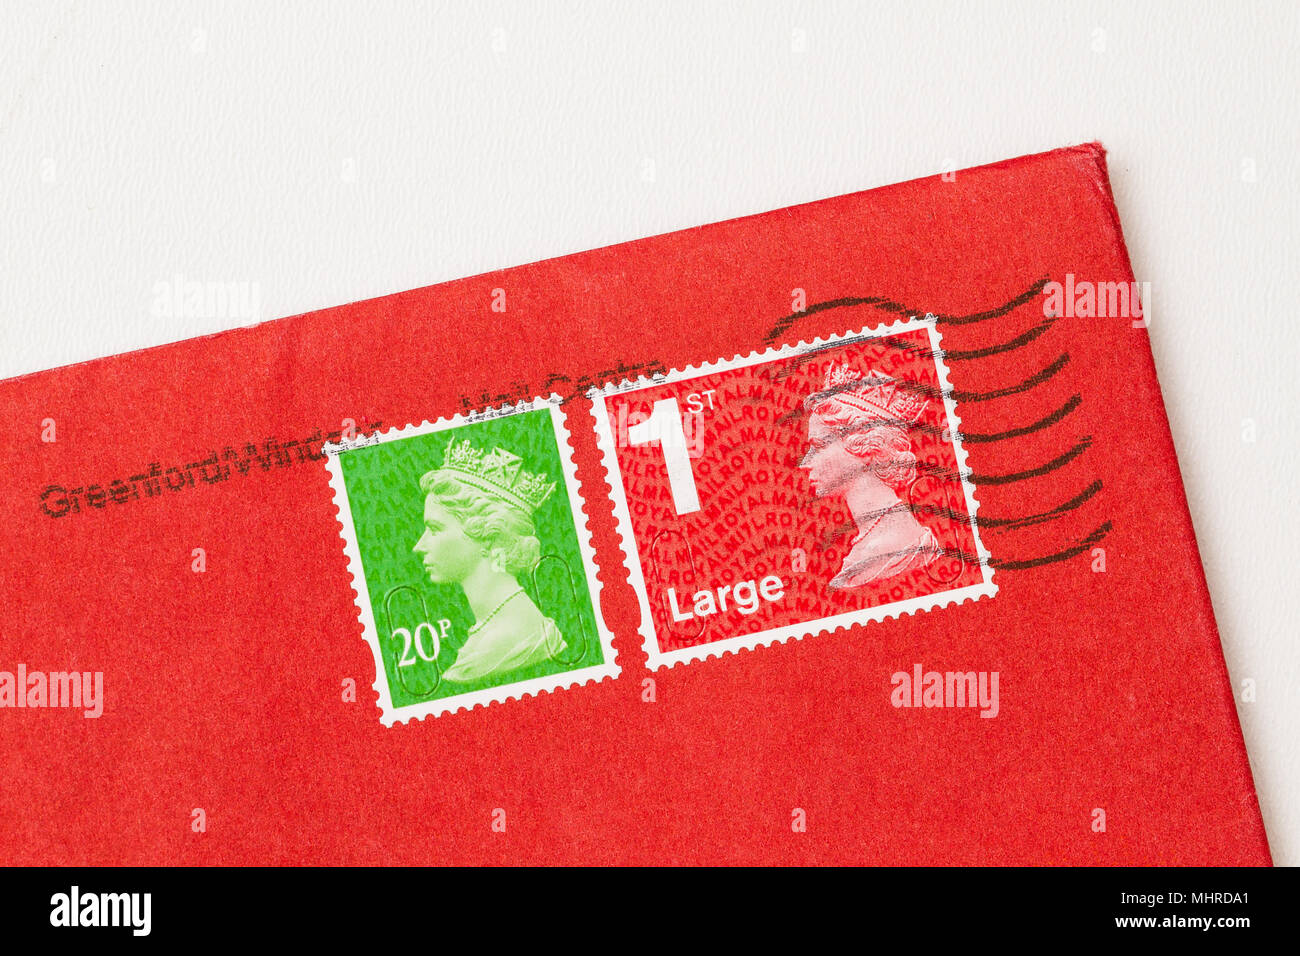 Envelope corner with 2 stamps, ones red, one green, of Queen Elisabeth II. UK postage stamp on red paper. Stock Photo